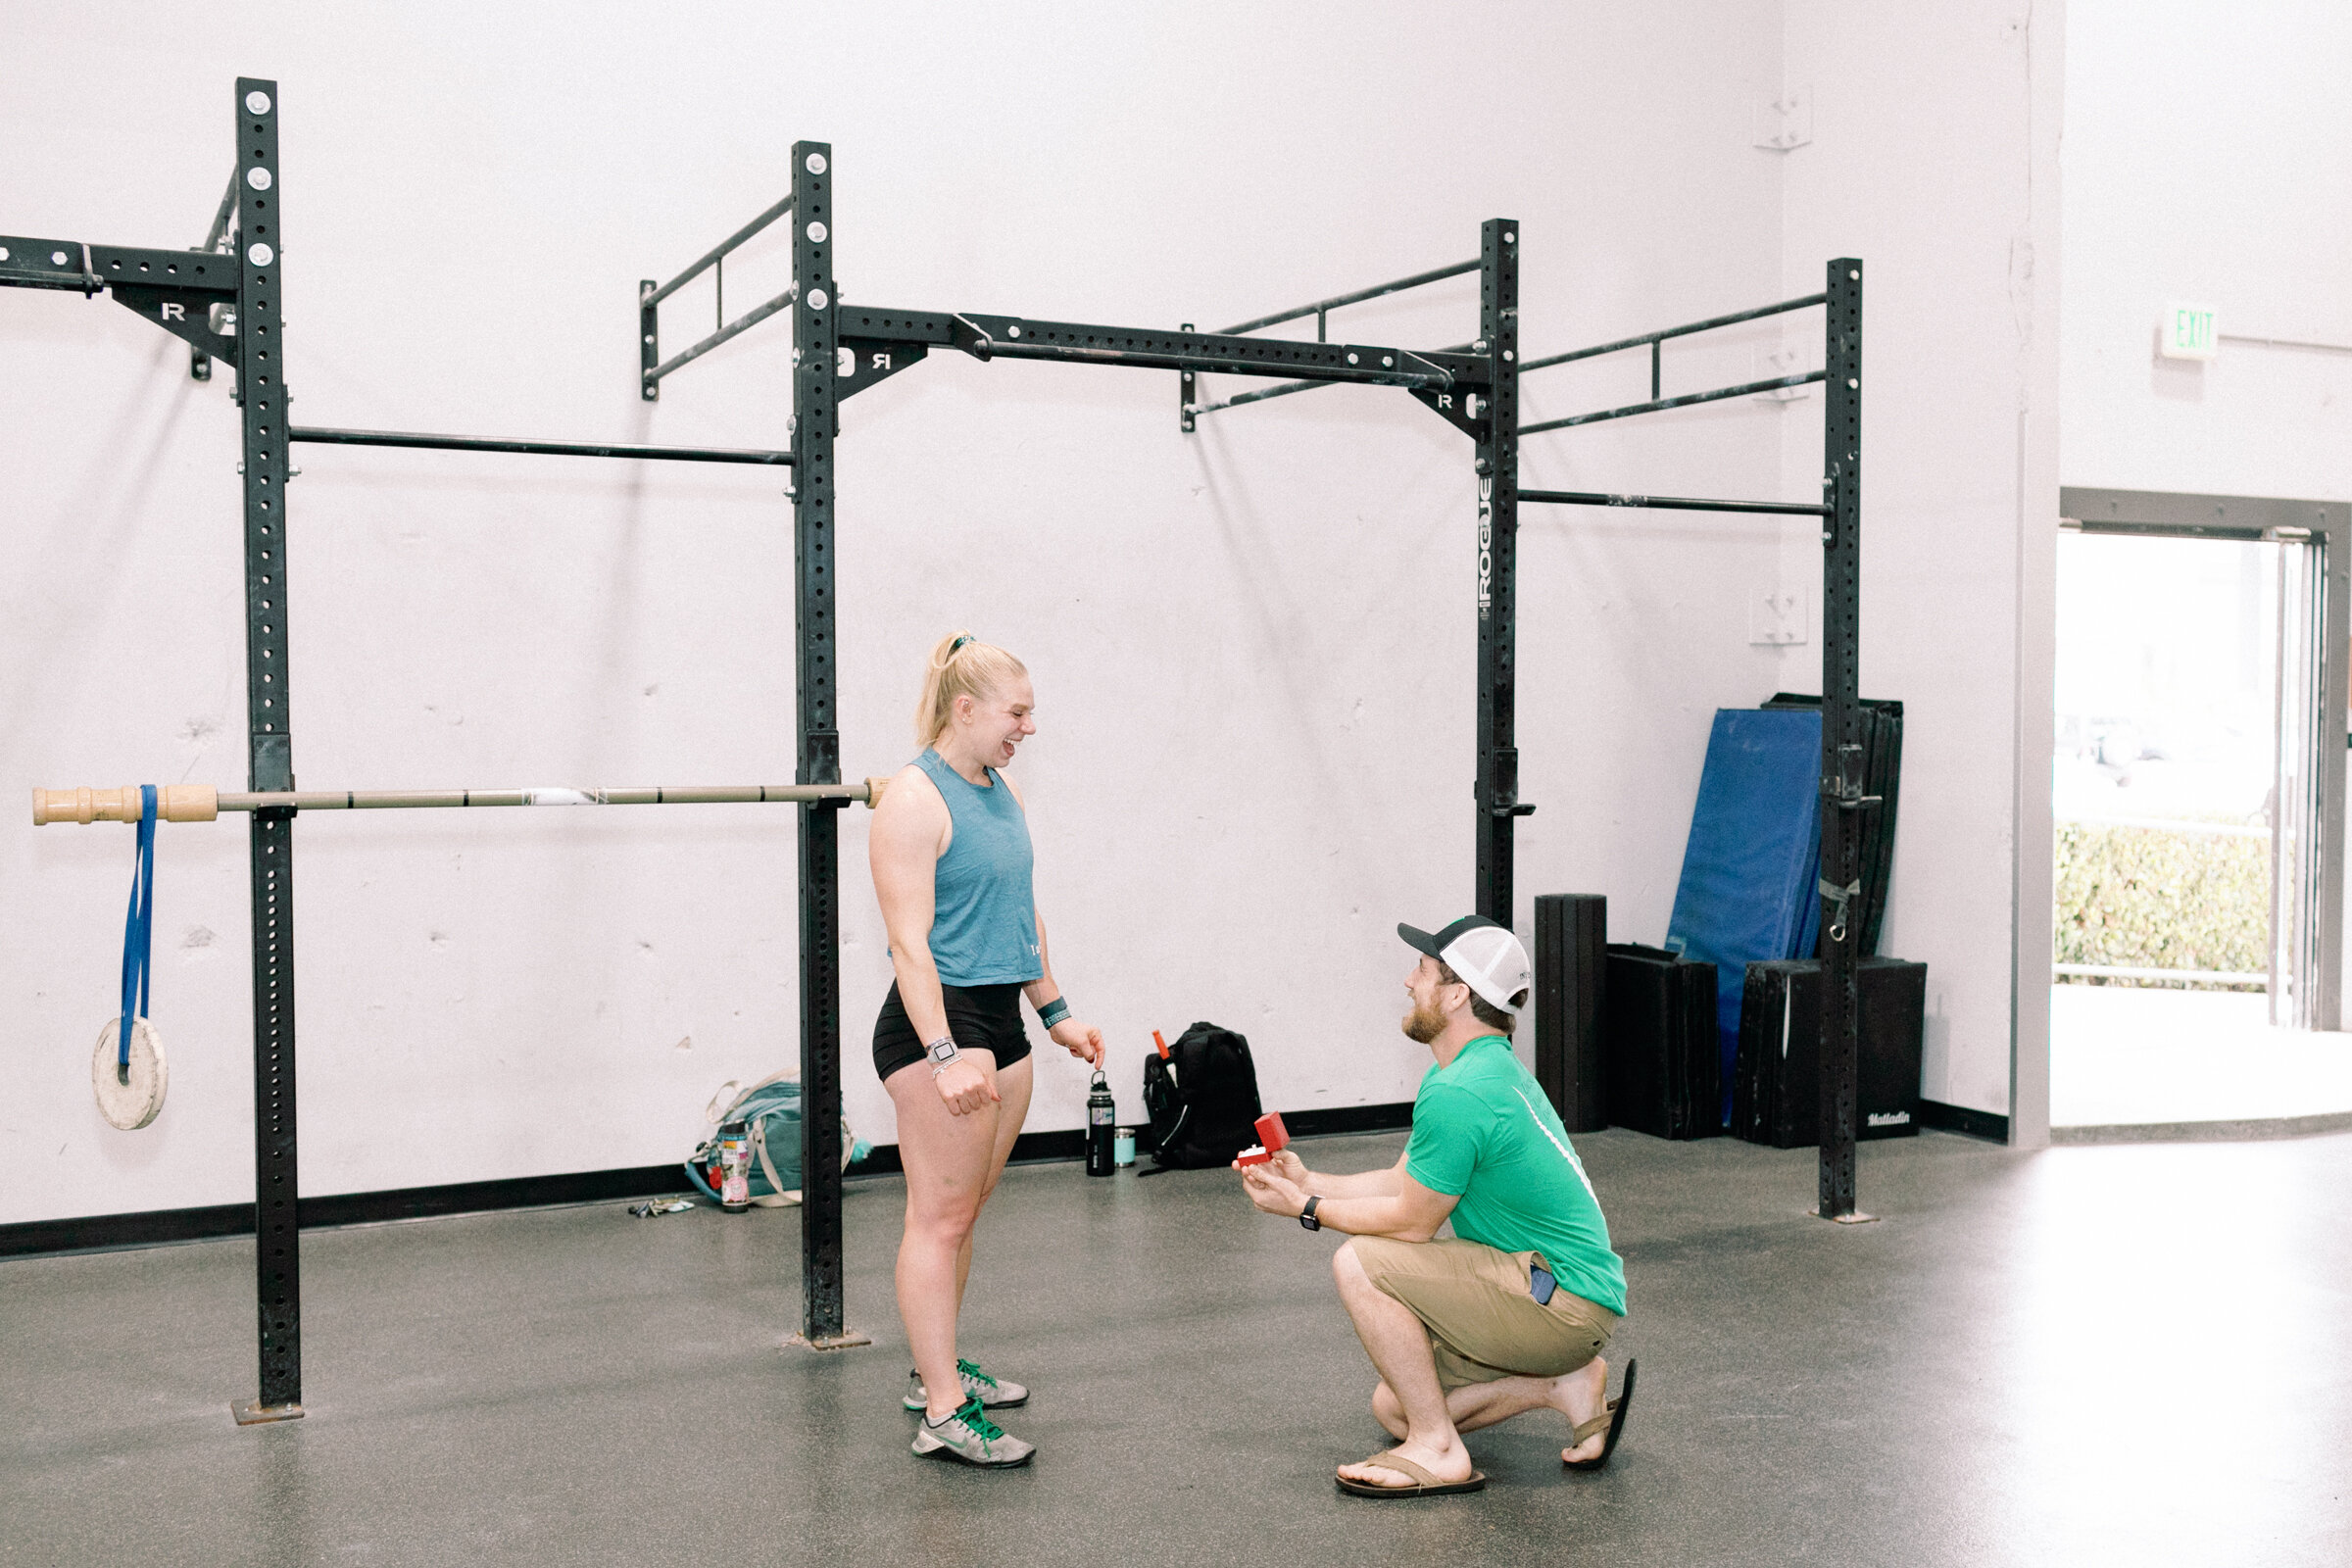 Colin and Ashlie's Surprise Proposal at Invictus Fitness-4.jpg